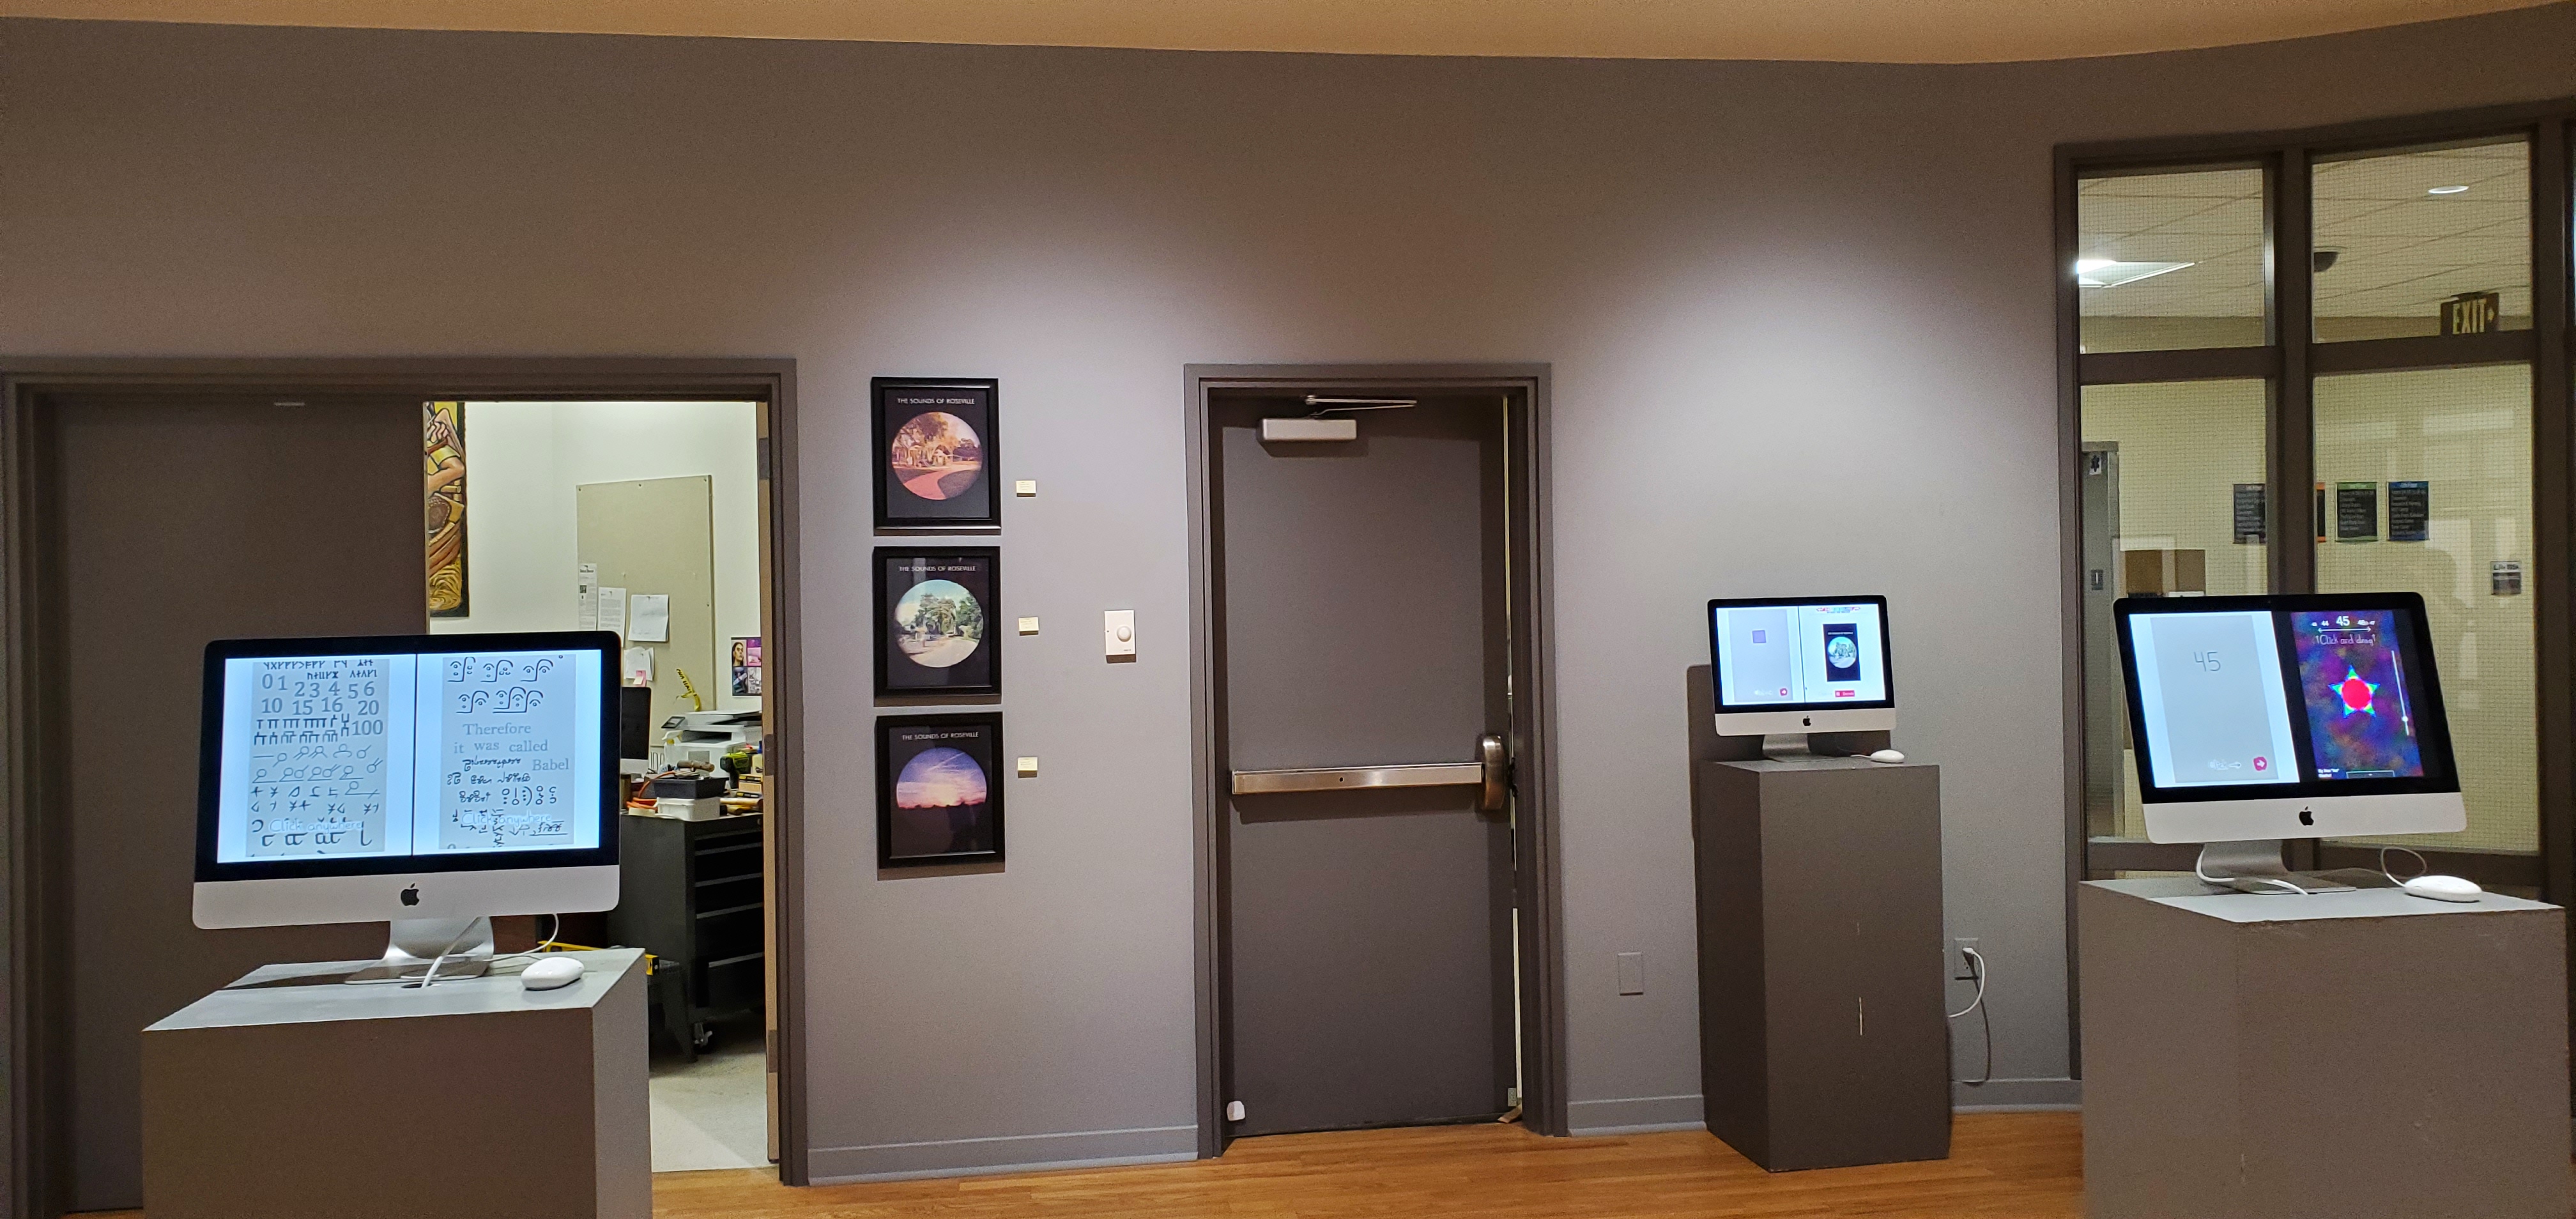 The Ridley art gallery, with my projects displayed on monitors sitting on pedastals, and three framed images on the wall.